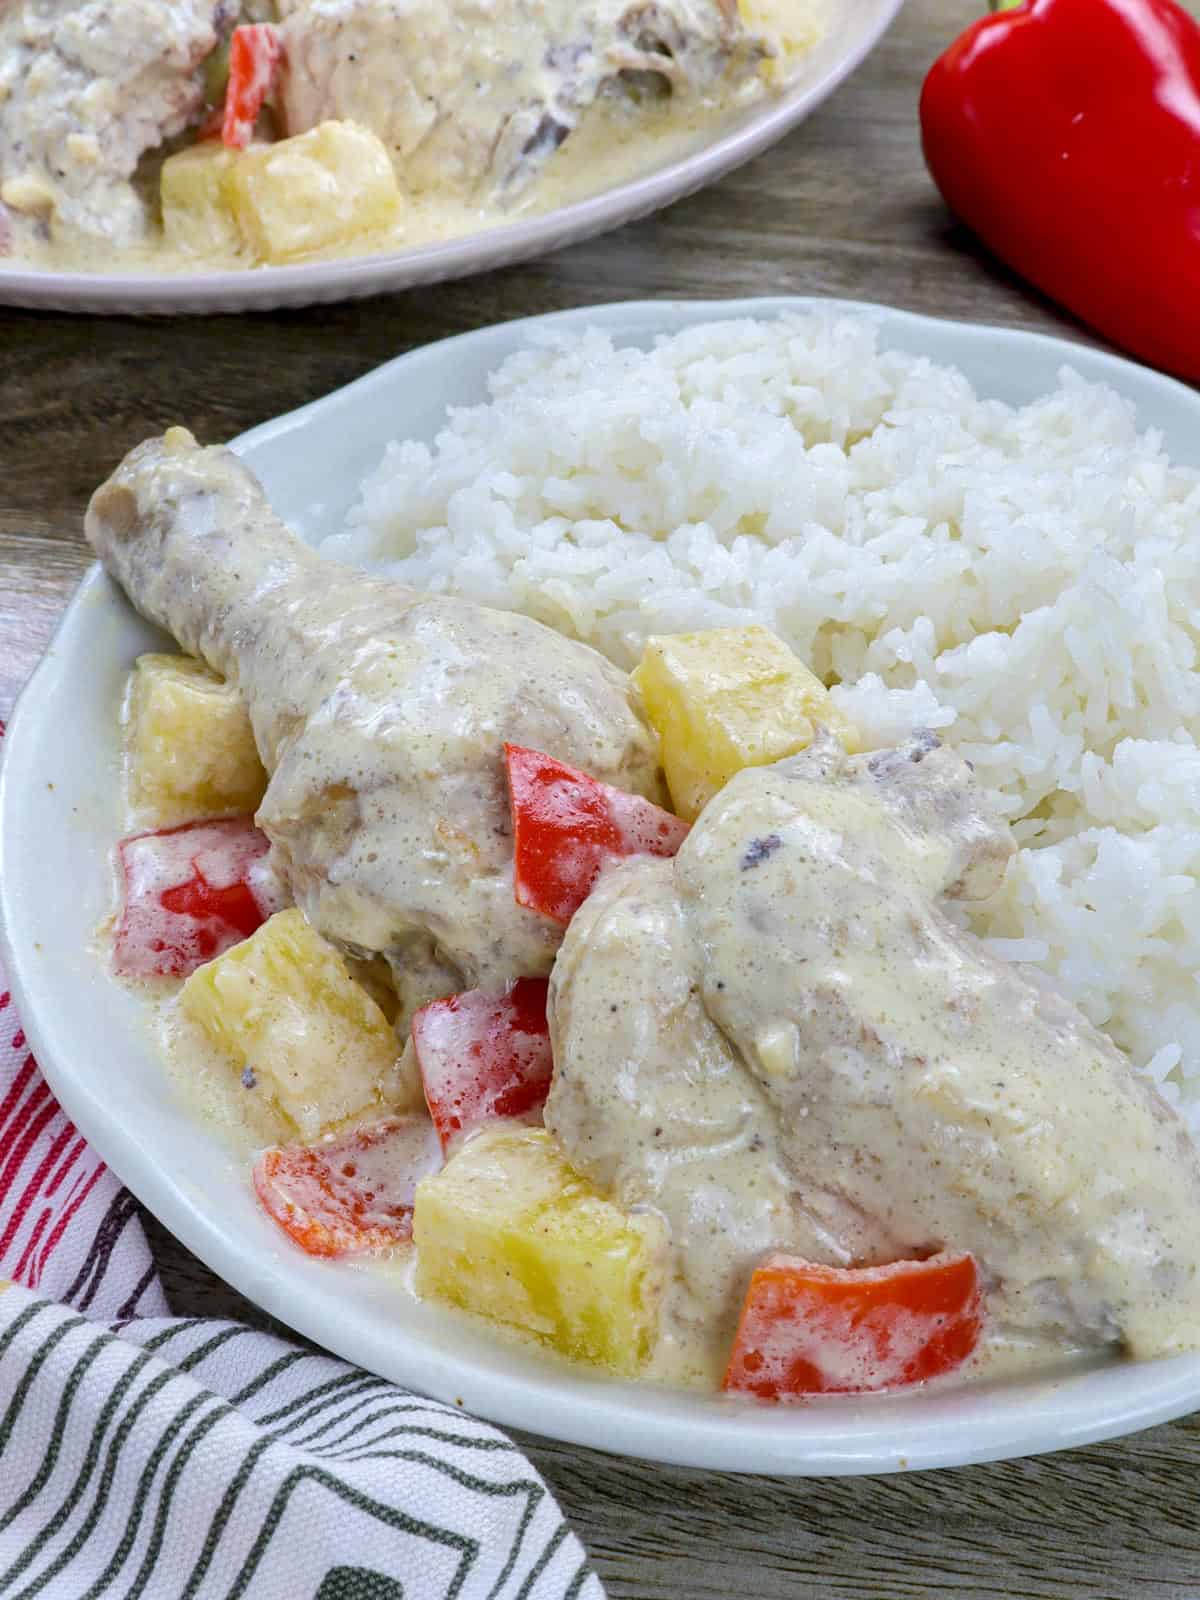 Filipino-style creamy chicken and pineapple stew on a white plate with steamed rice on the side.